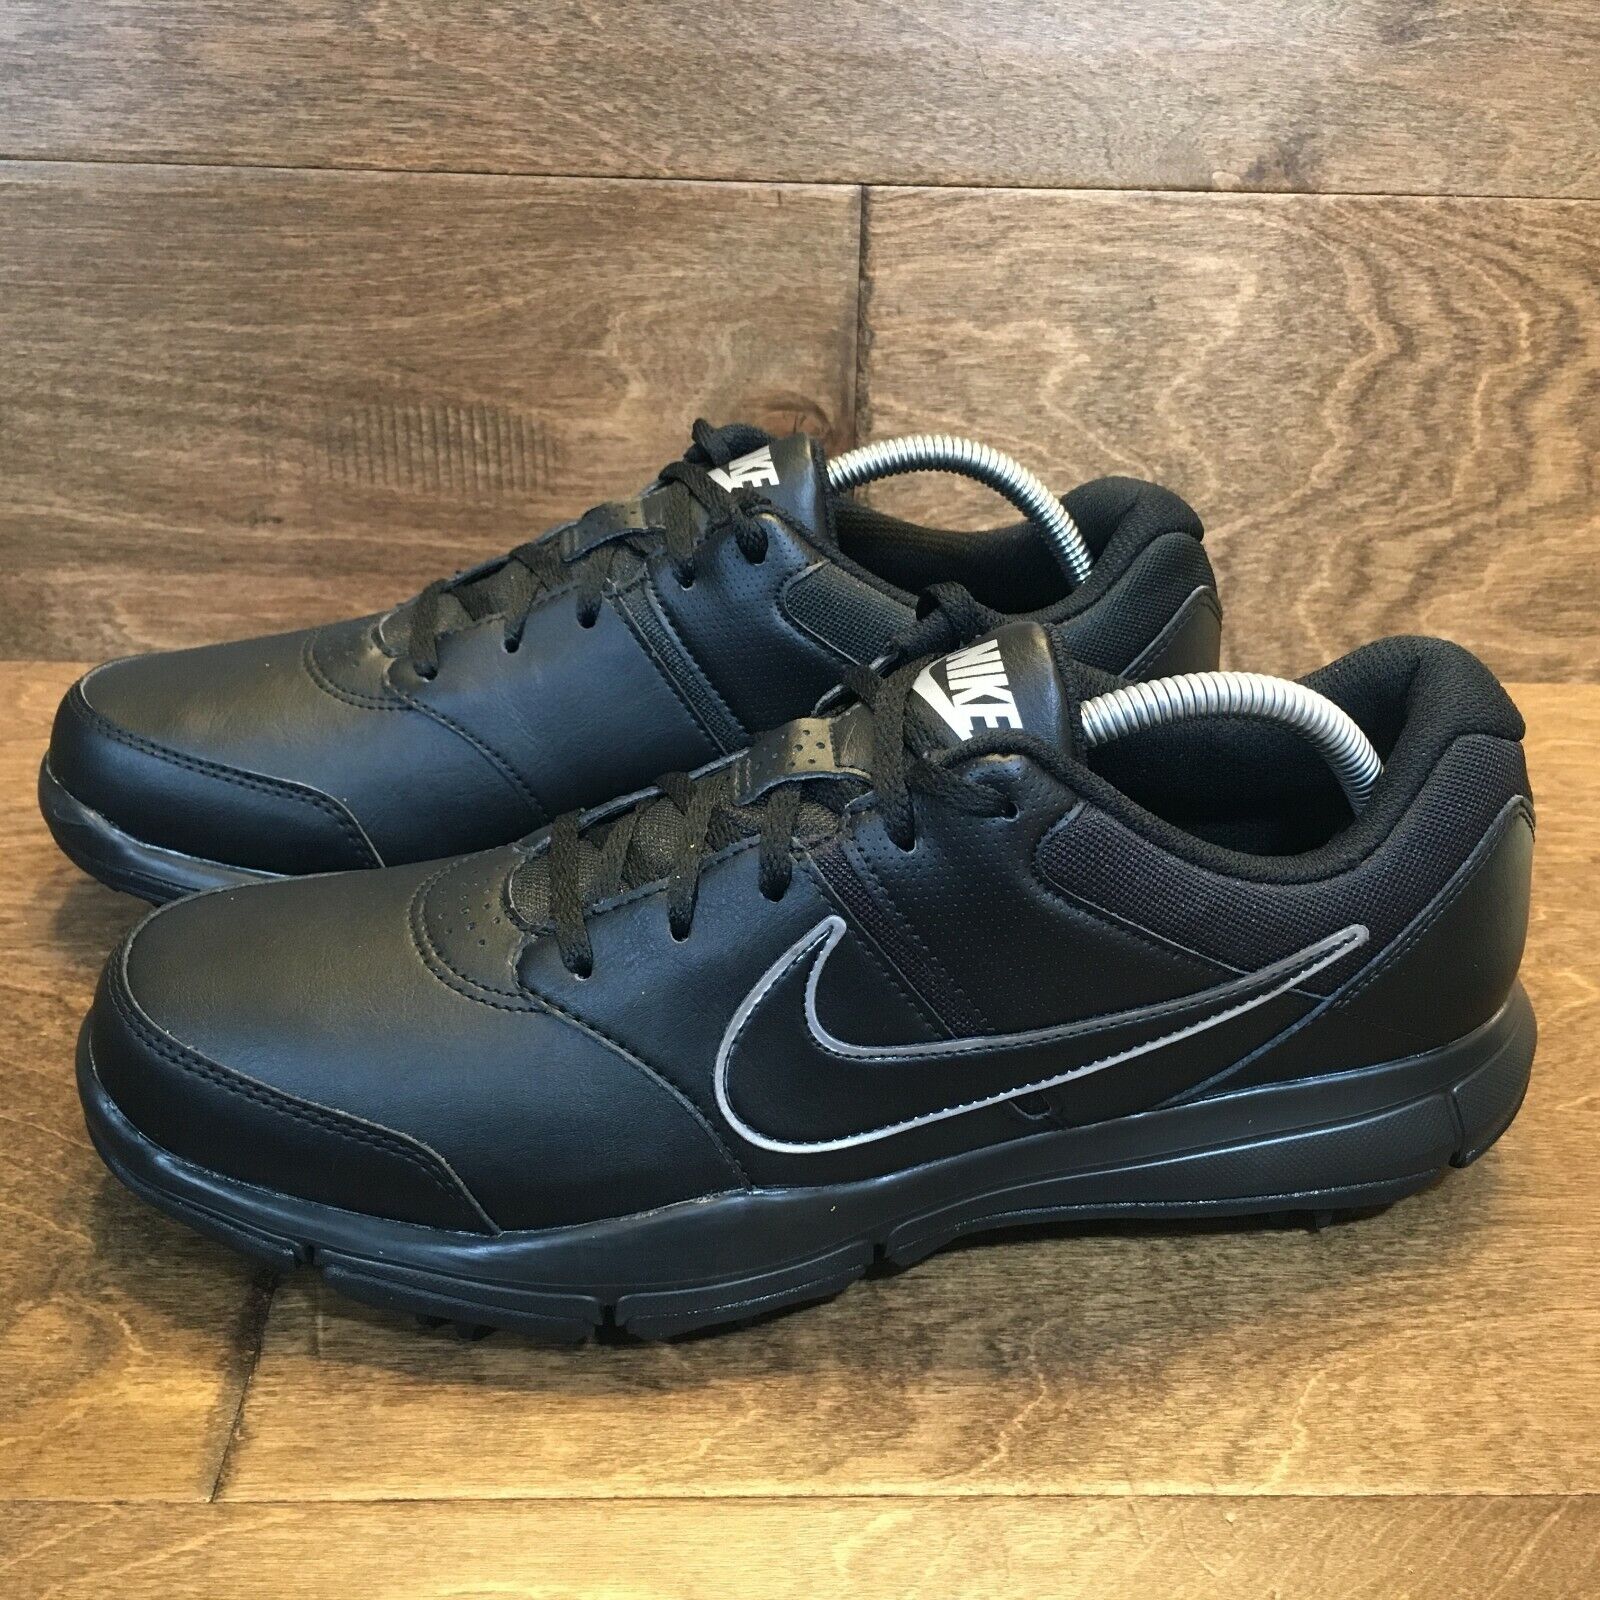 nike durasport 4 golf shoes replacement spikes